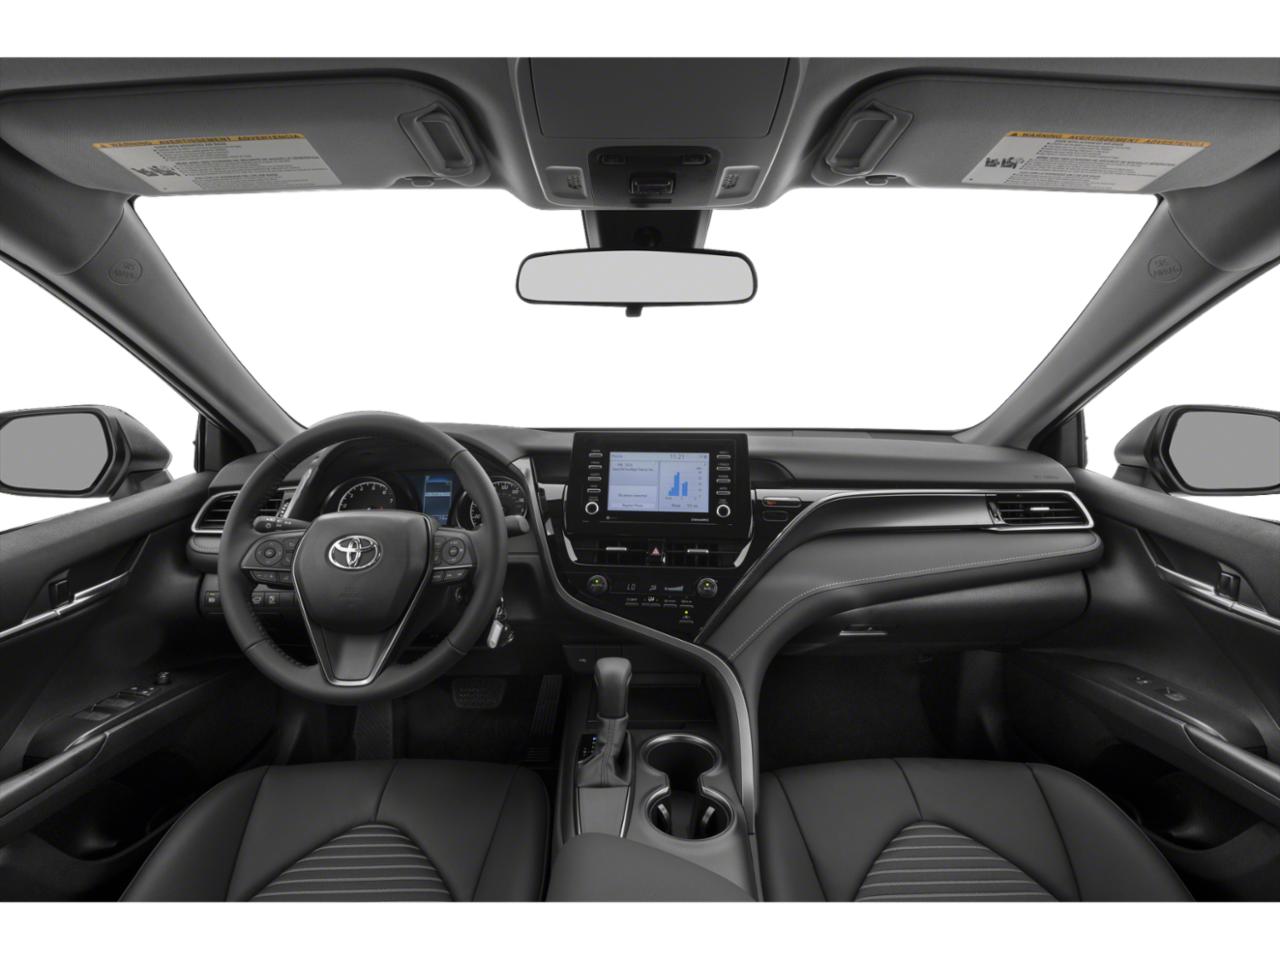 2021 Toyota Camry Vehicle Photo in Winter Park, FL 32792